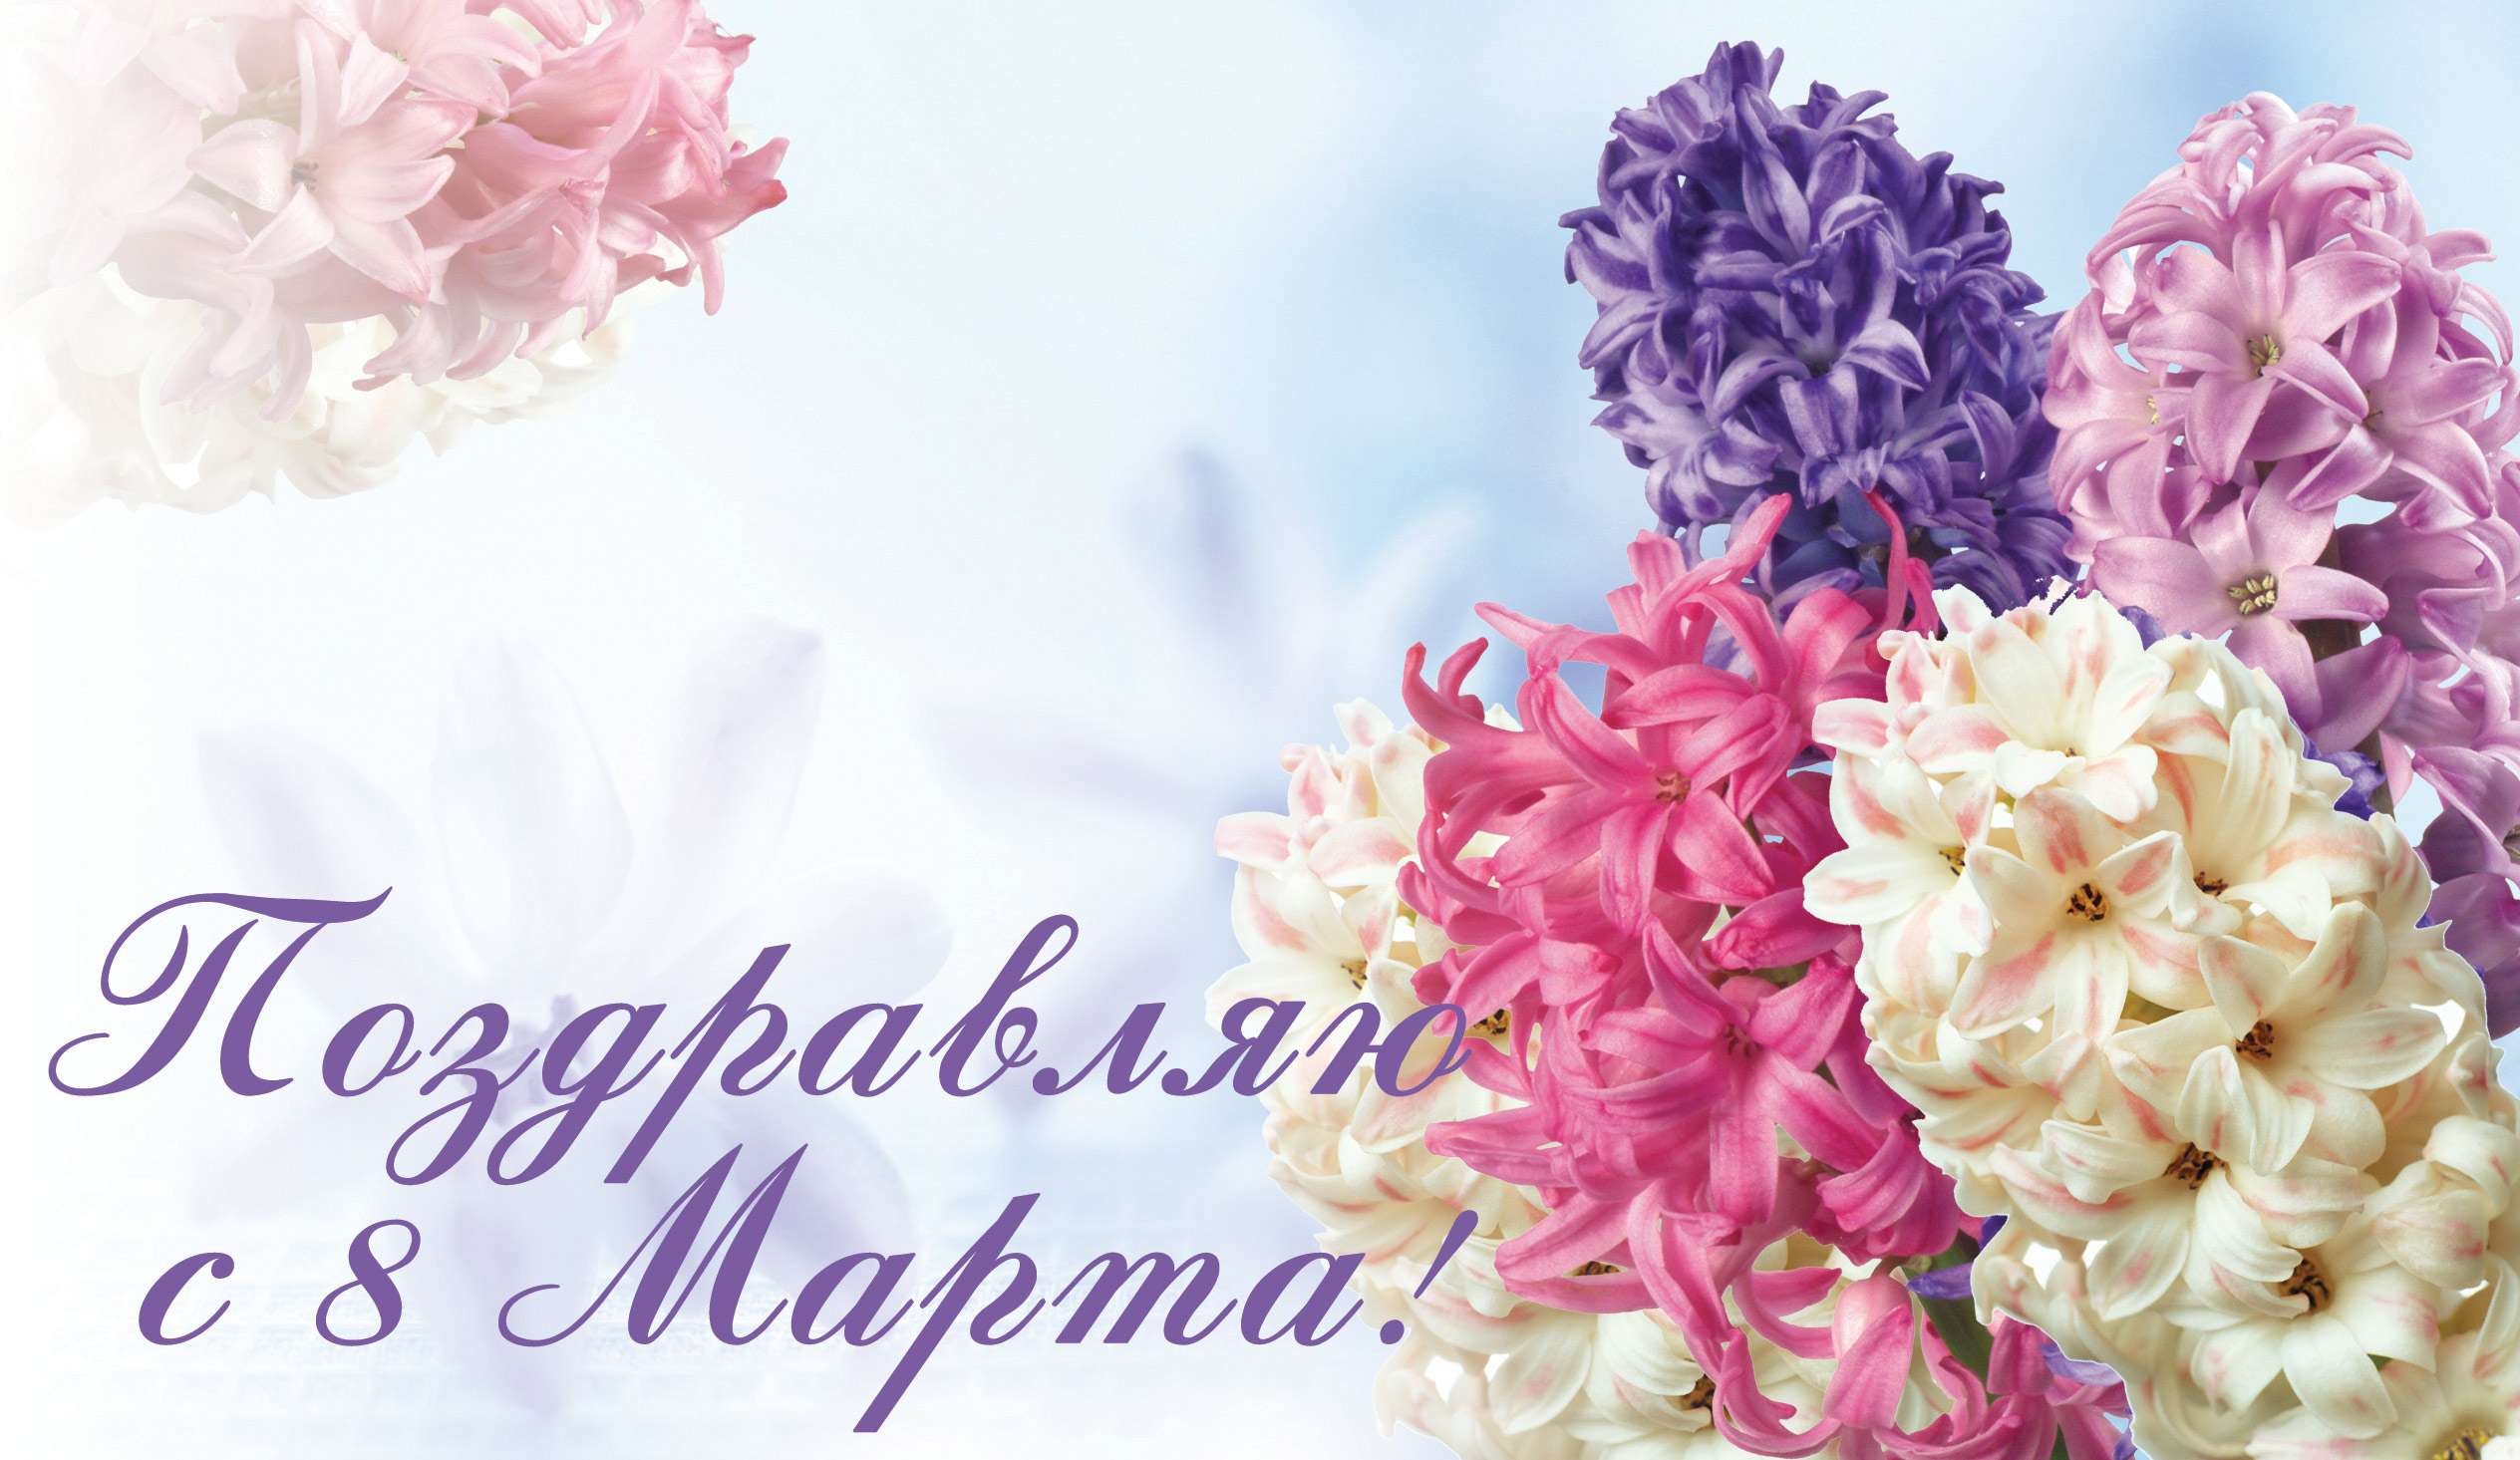 2018Holidays___International_Womens_Day_Greeting_card_with_spring_flowers_hyacinths_on_March_8_130557__1